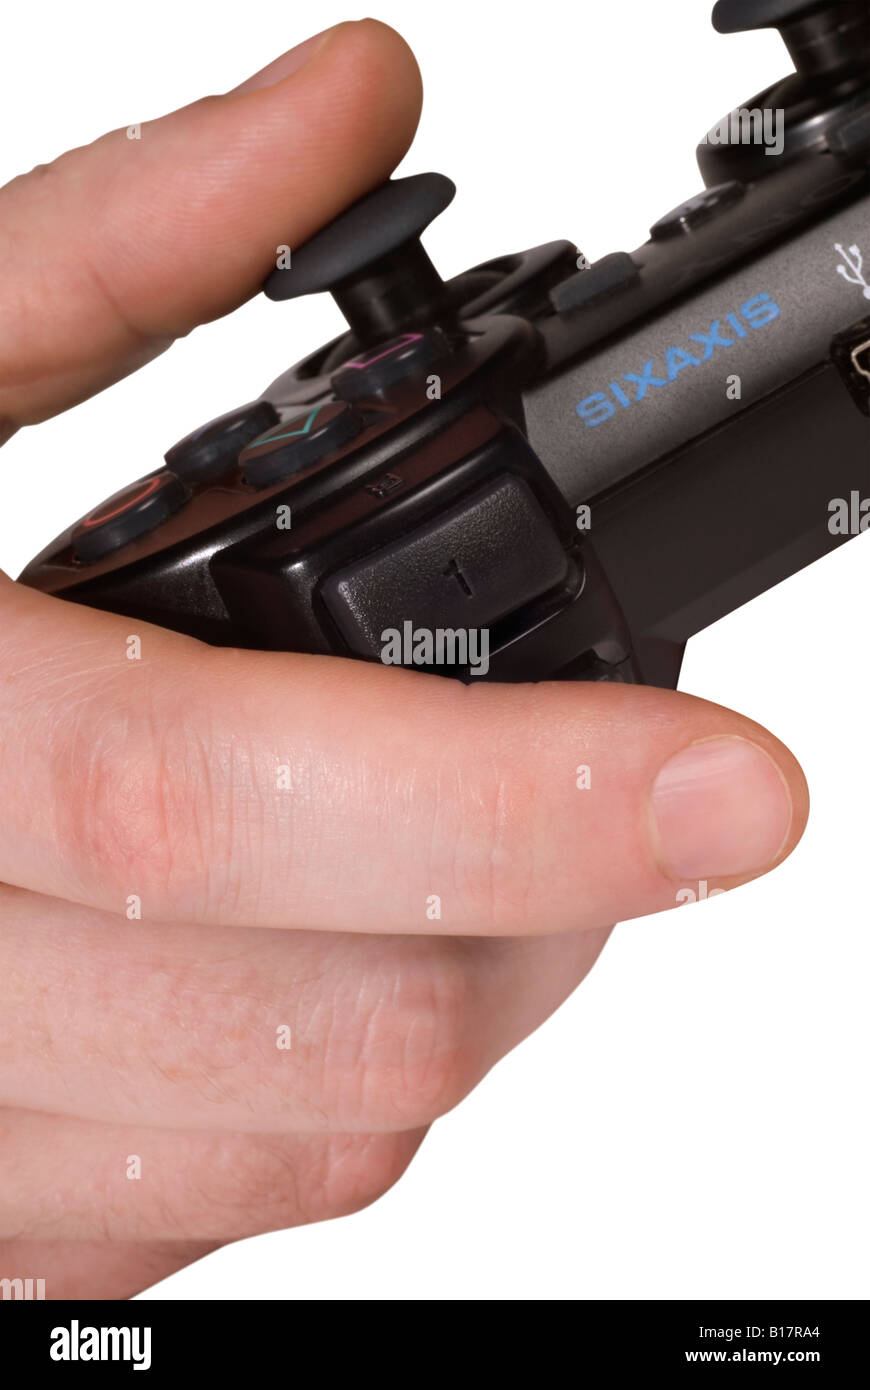 Thumb on Analogue Stick of a Game Console Controller Stock Photo